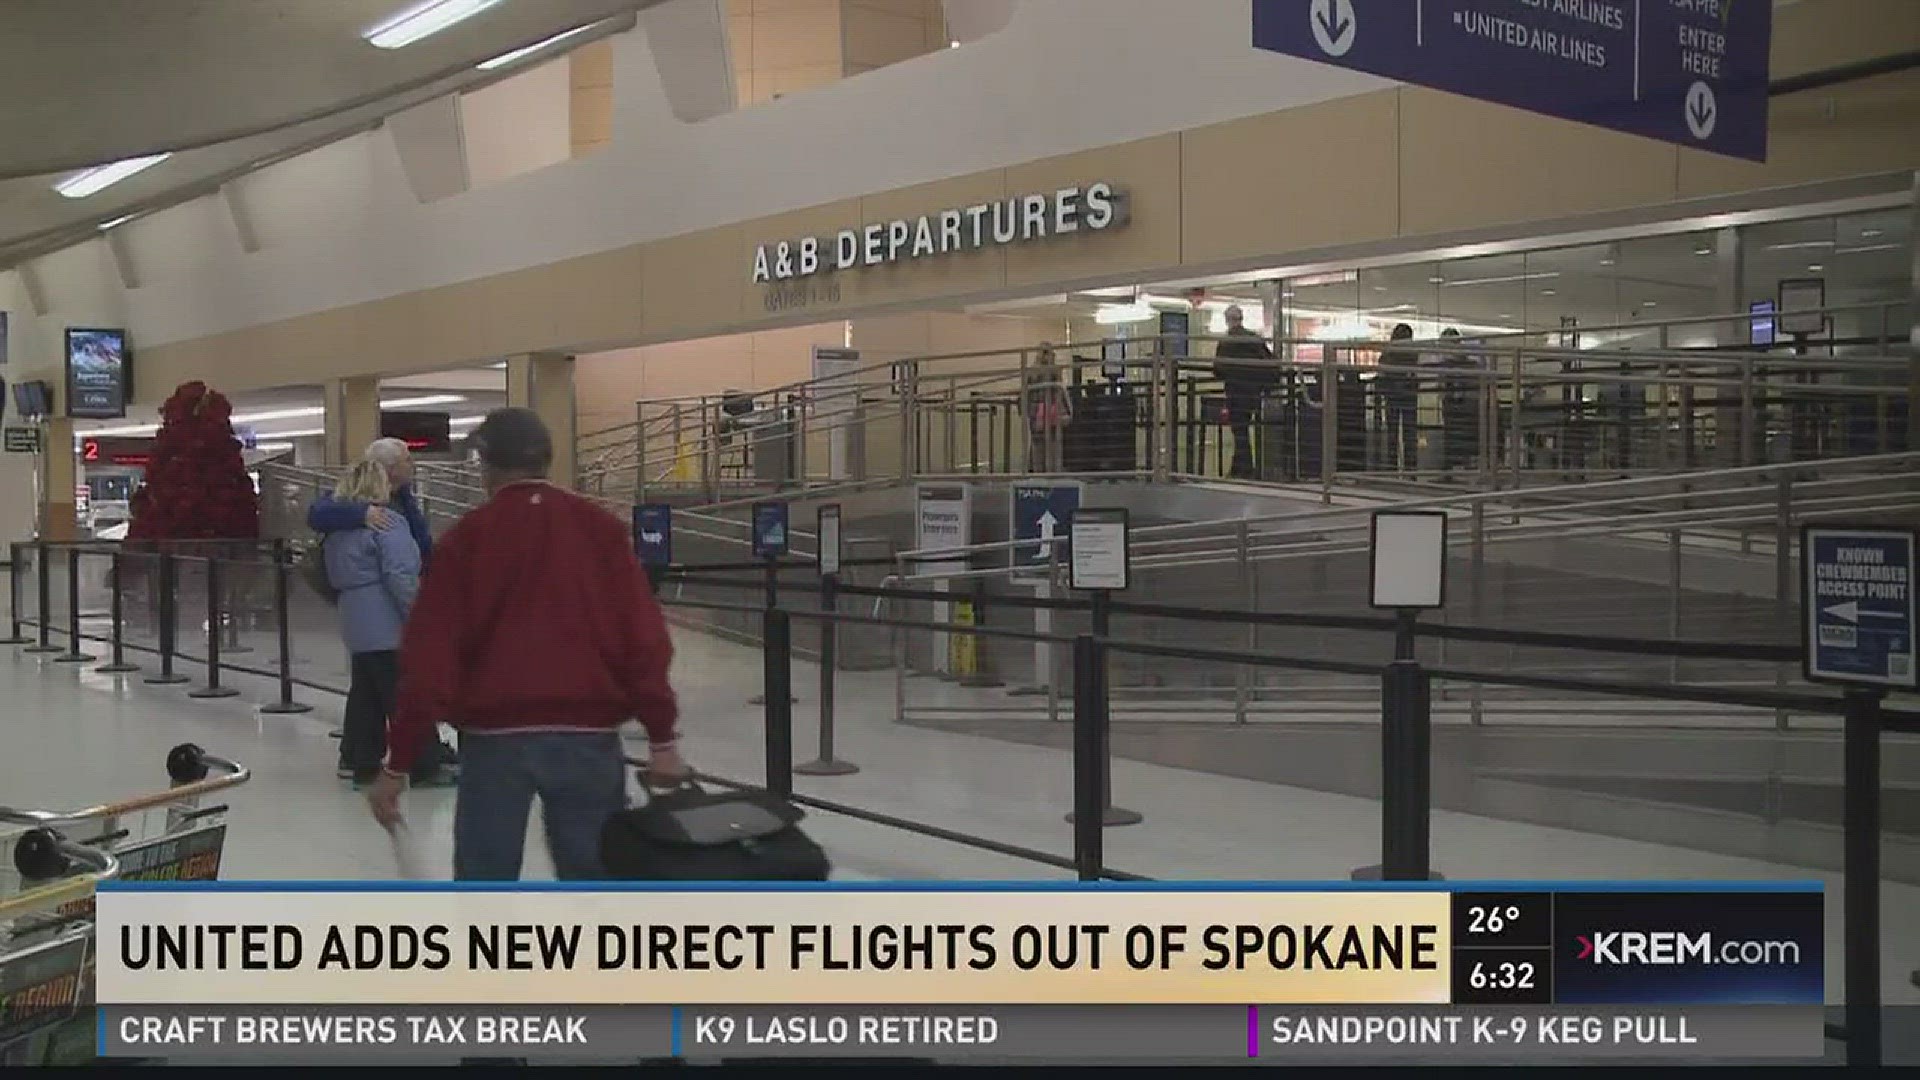 United adds new direct flights out of Spokane